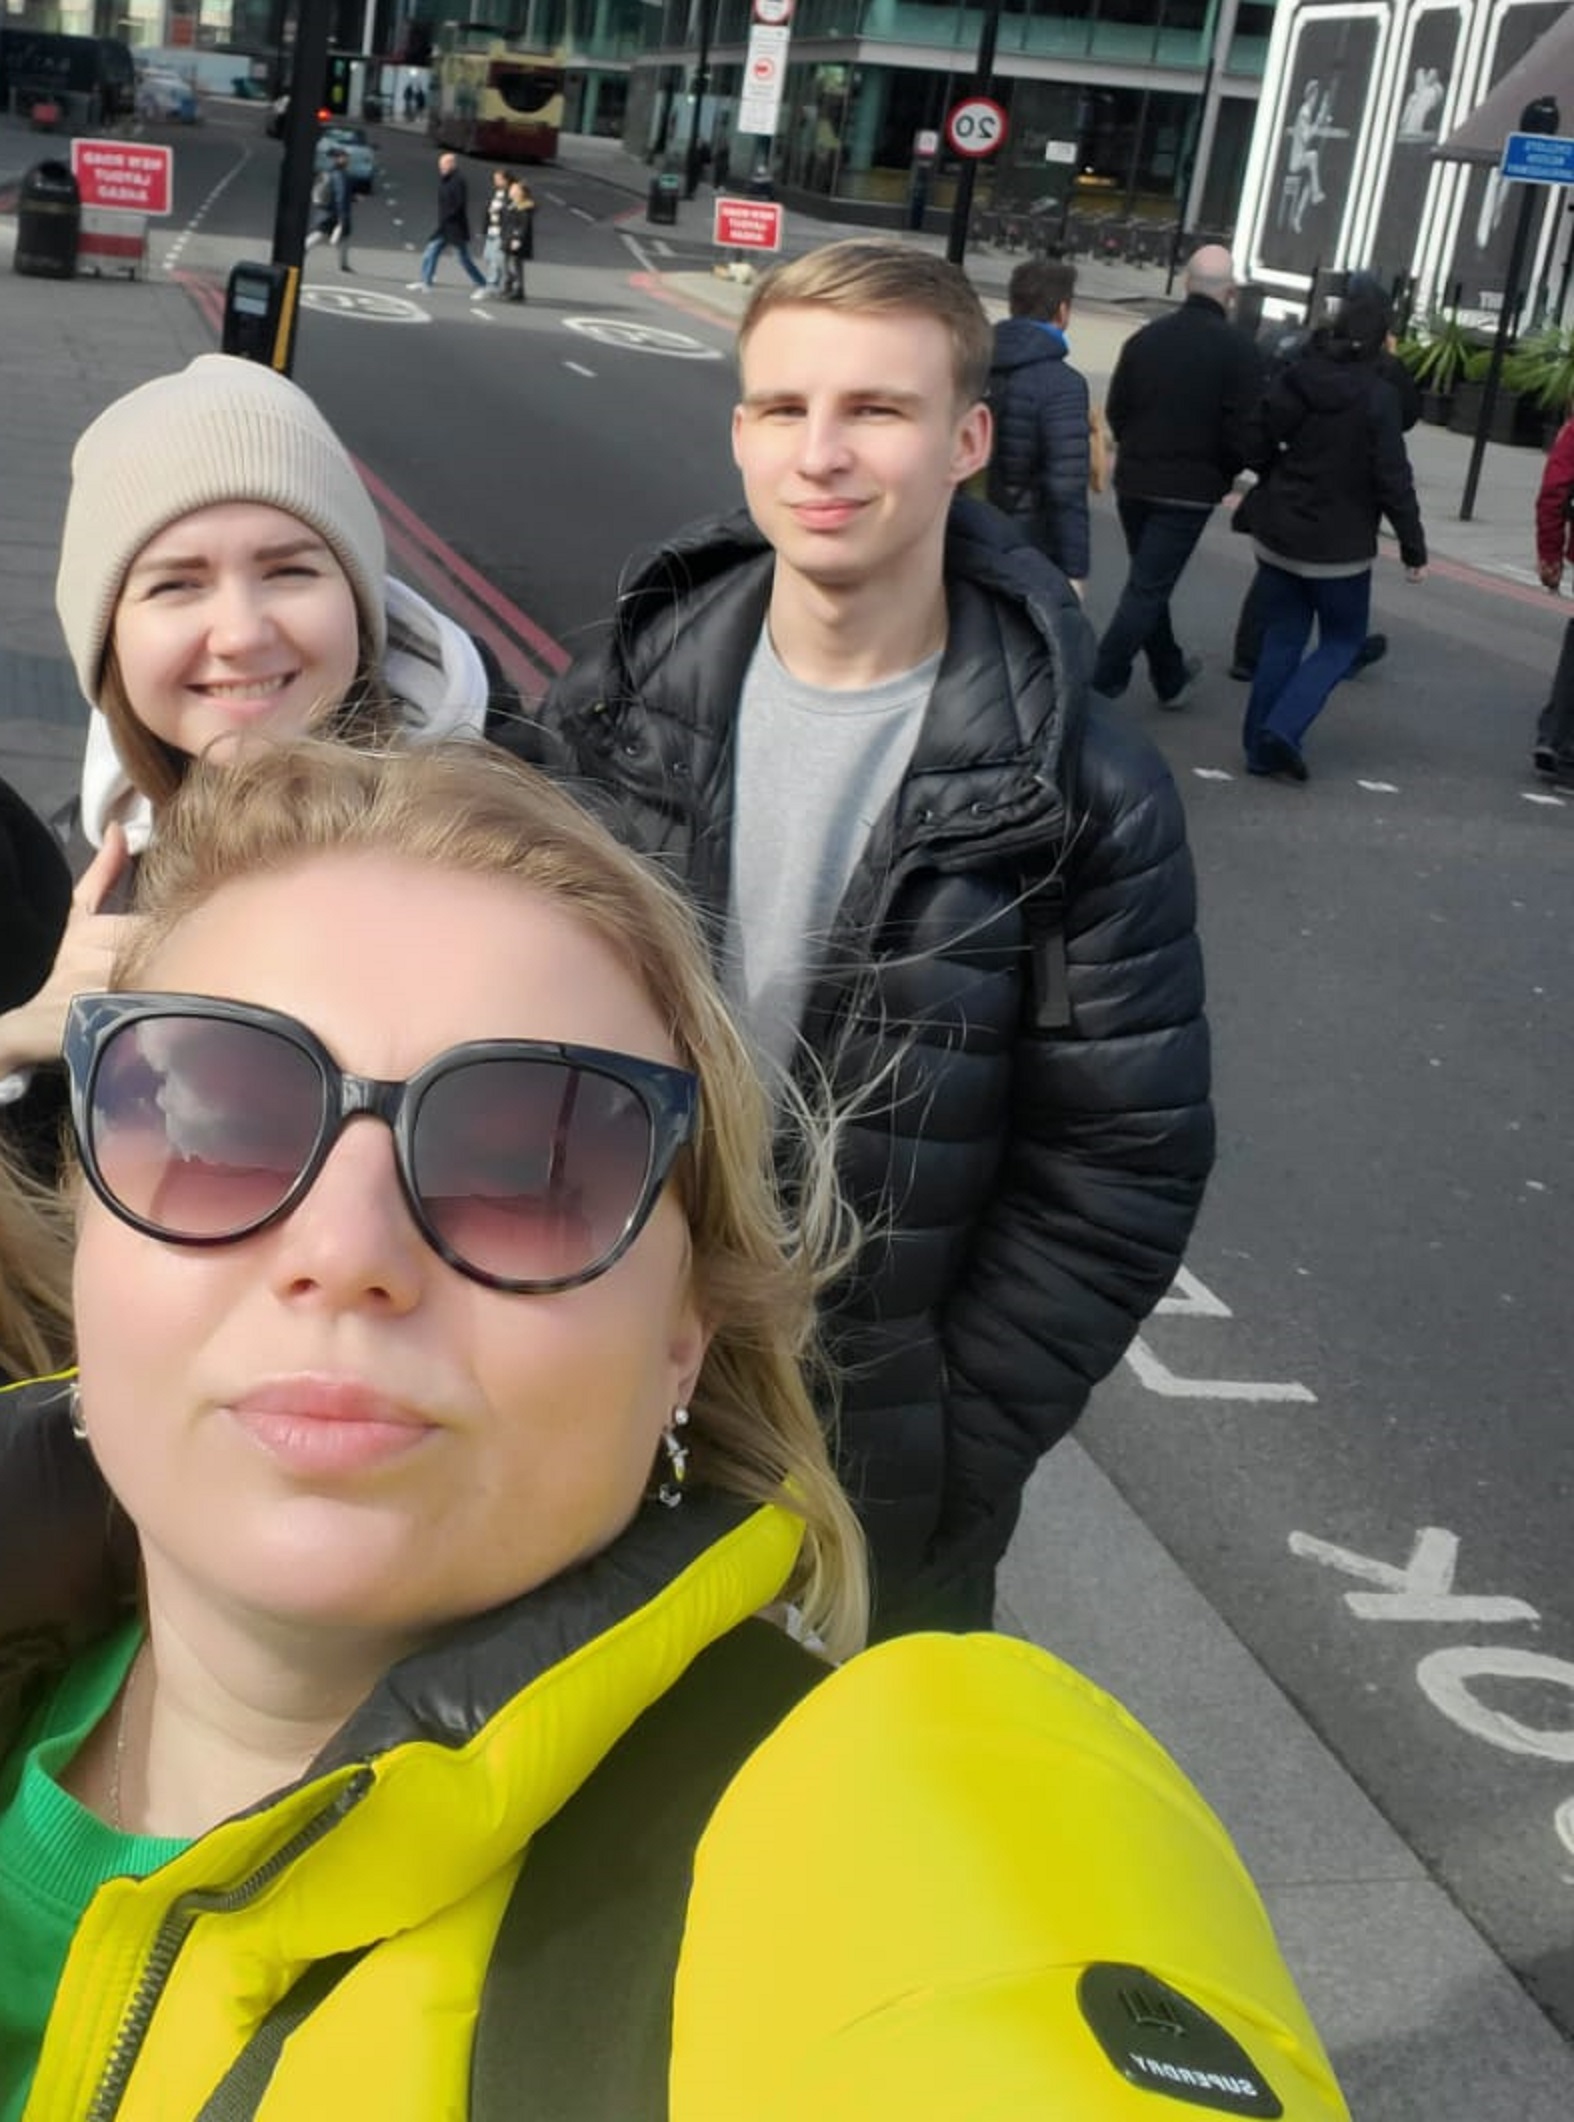 Denys Dreyzer, 18, from Kherson (back right) with his friend Viktoriia (back left) and mother Ganna (front)